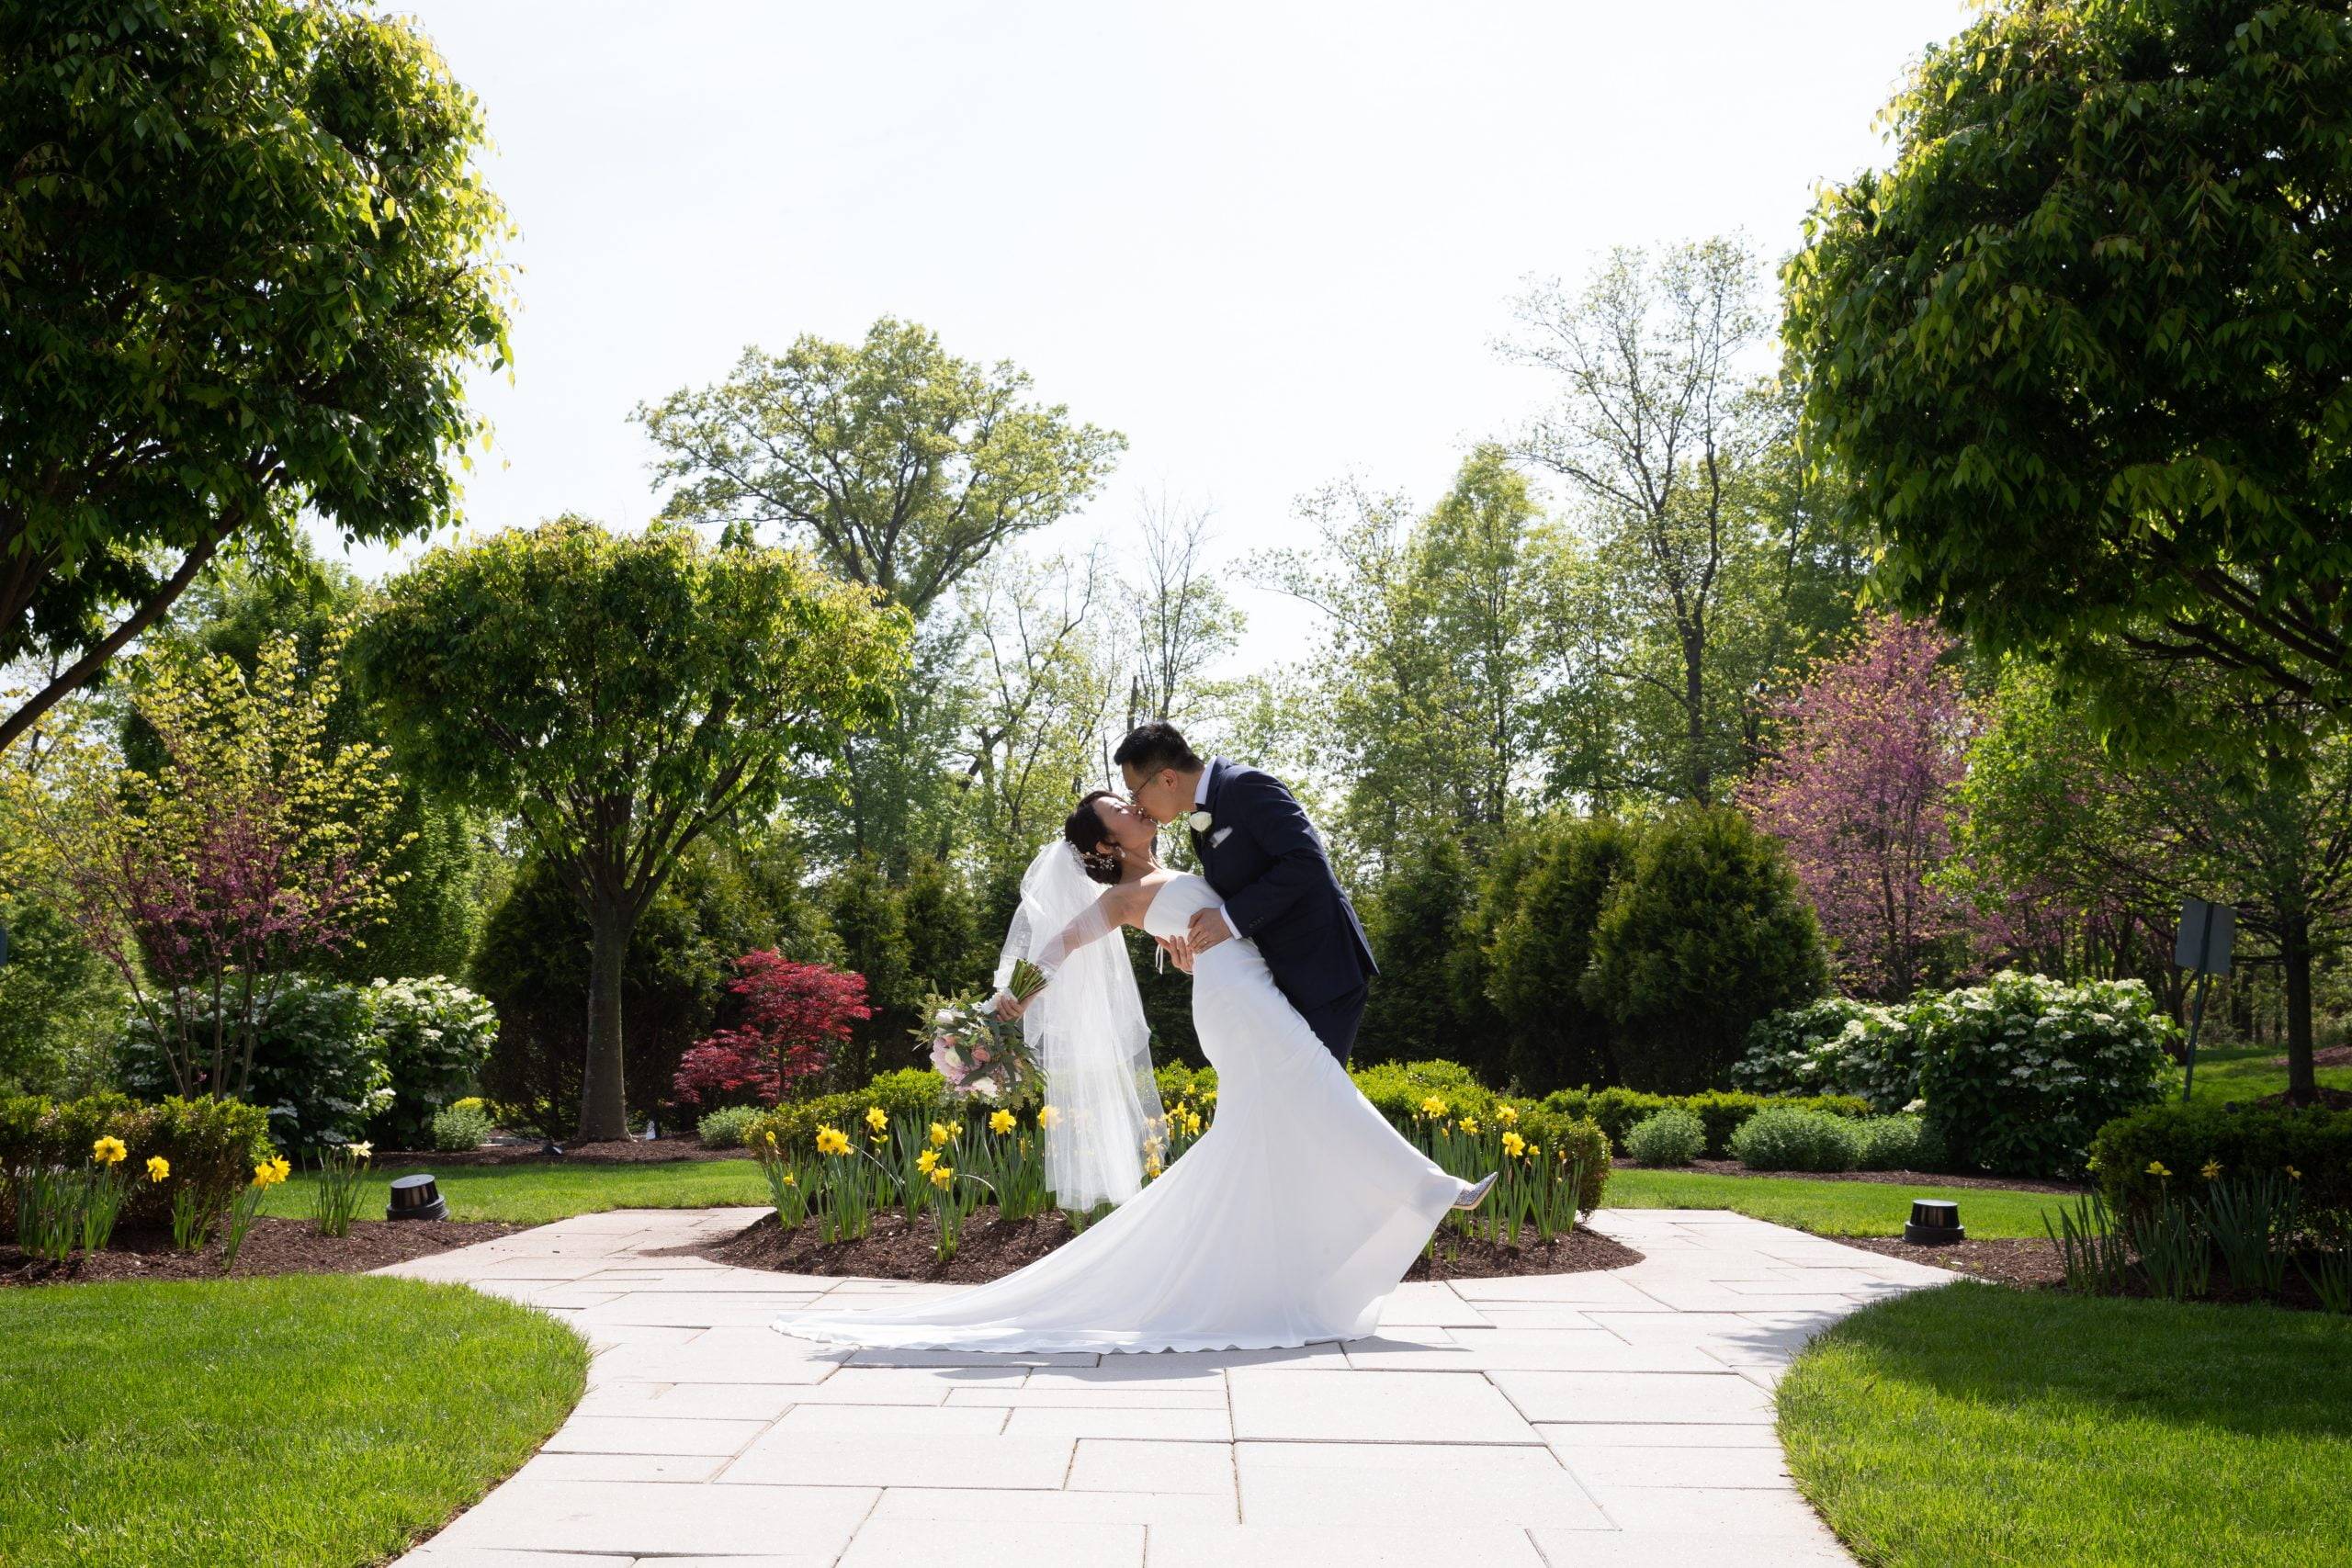 A bride and groom kissing in a garden.